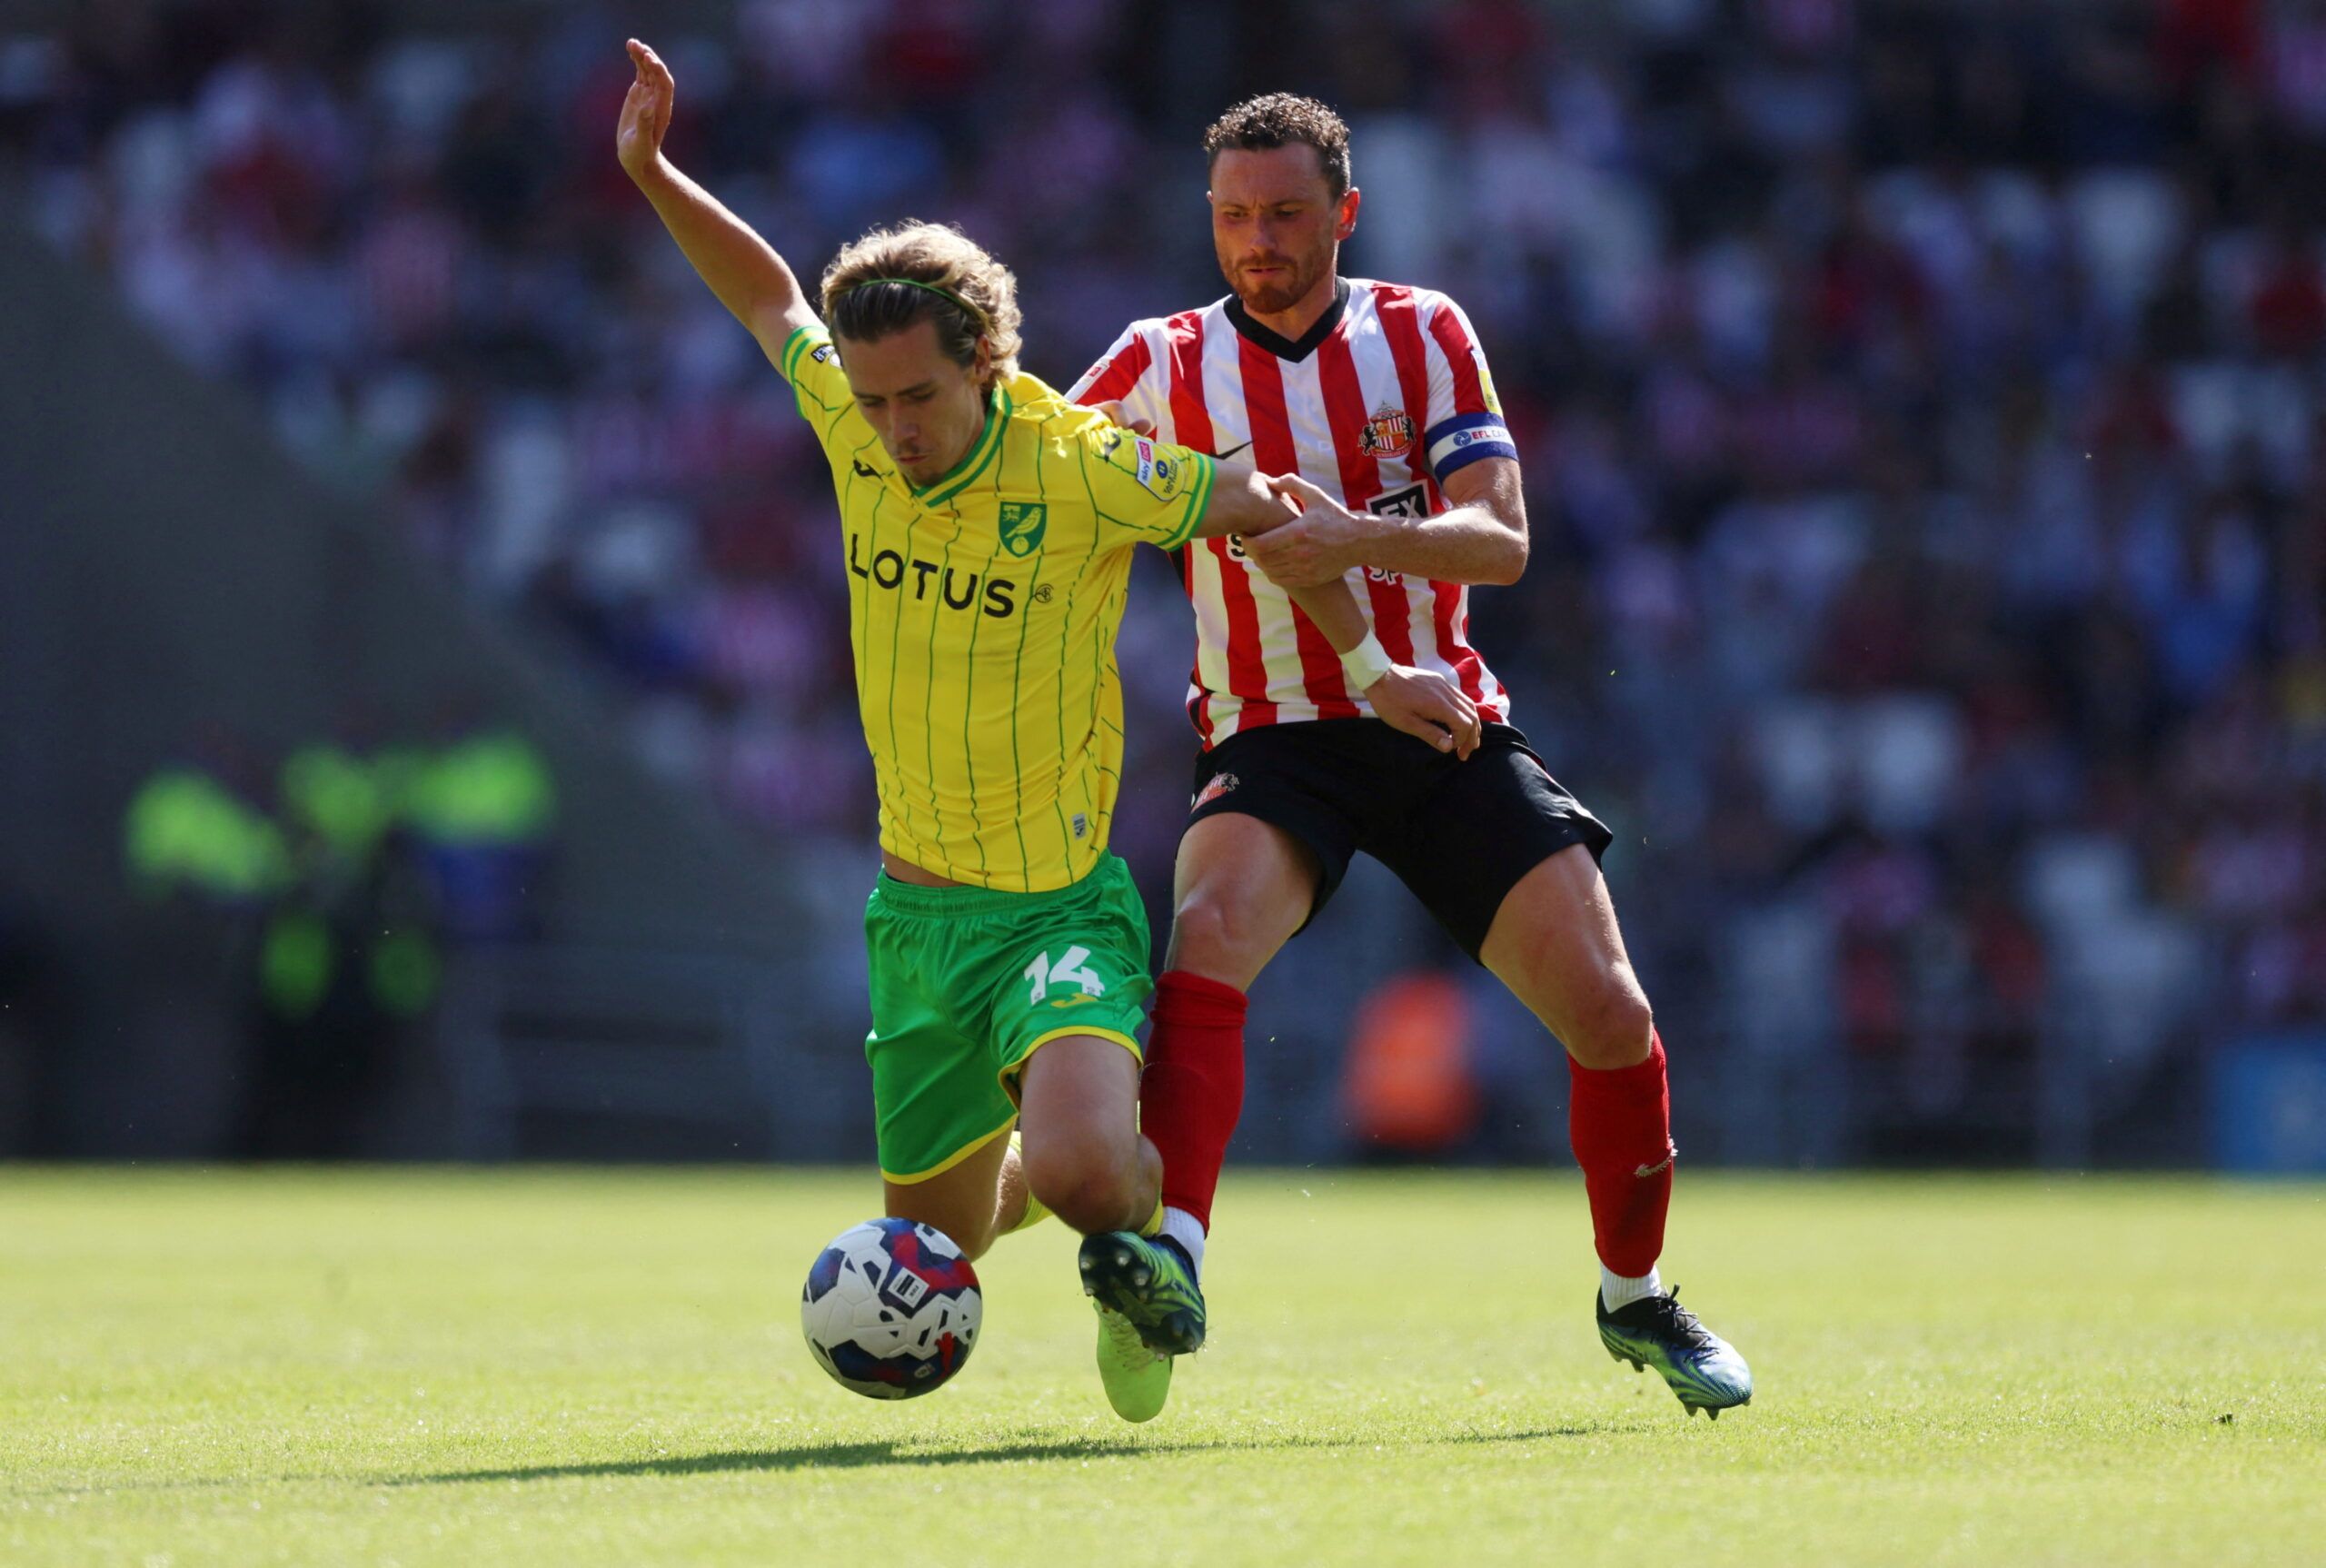 Soccer Football - Championship - Sunderland v Norwich City - Stadium of Light, Sunderland, Britain - August 27, 2022 Norwich City's Todd Cantwell in action with Sunderland?s Corry Evans   Action Images/Lee Smith  EDITORIAL USE ONLY. No use with unauthorized audio, video, data, fixture lists, club/league logos or 